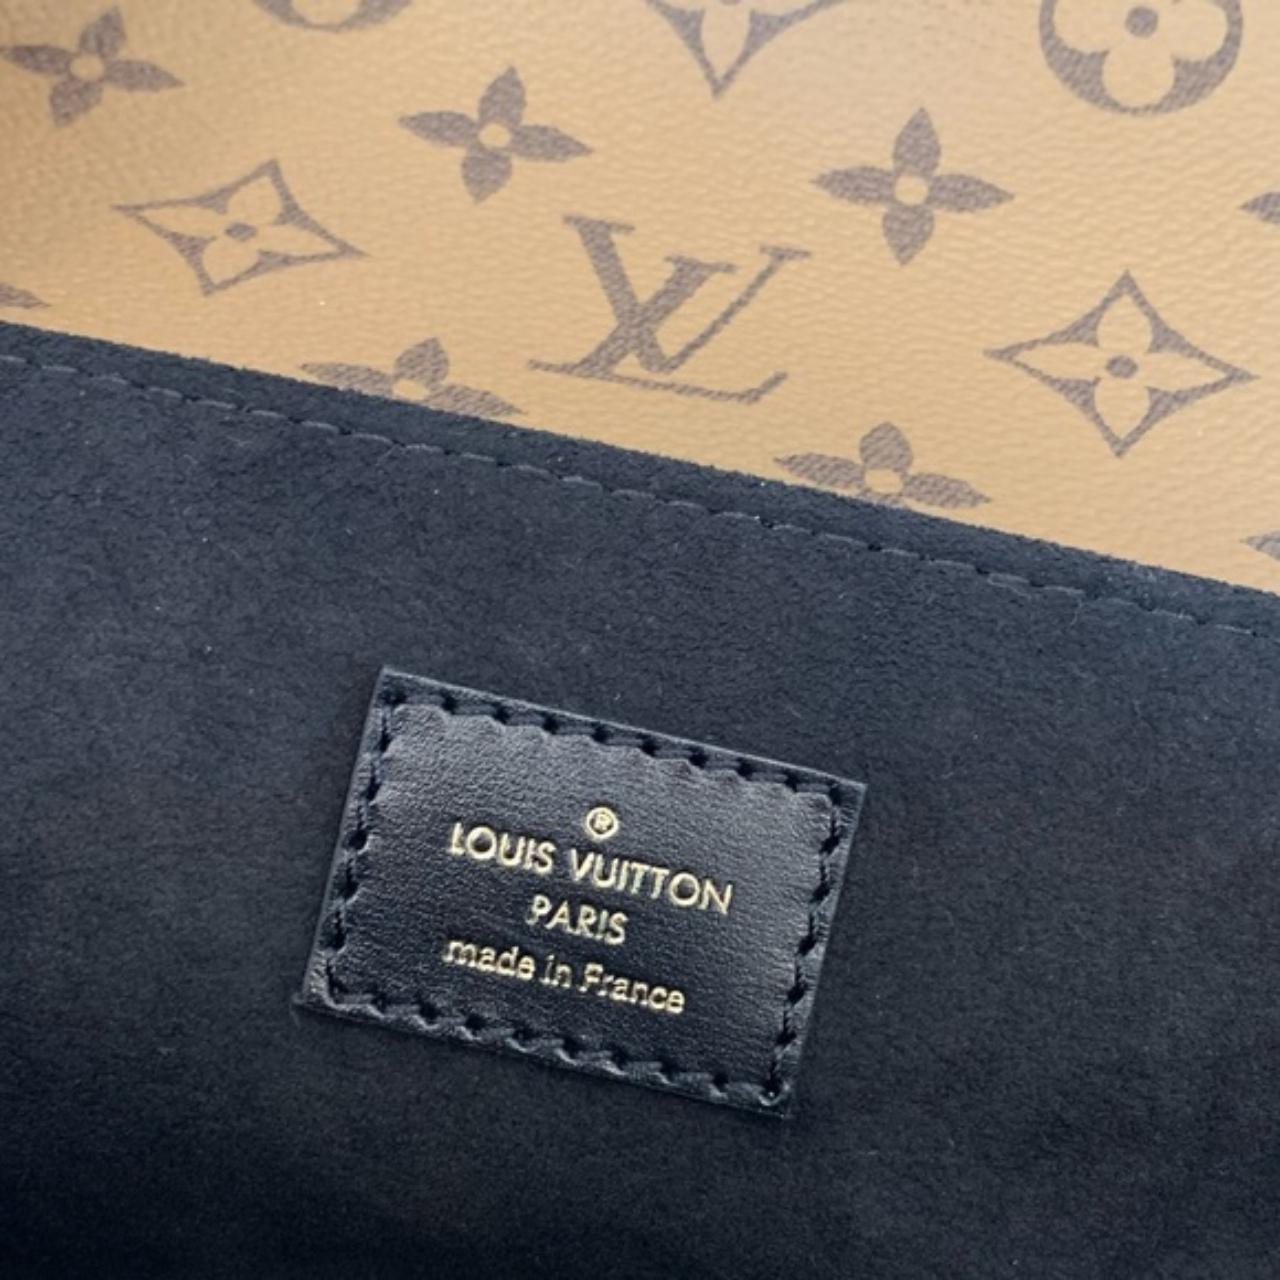 New in box guaranteed authentic LOUIS VUITTON